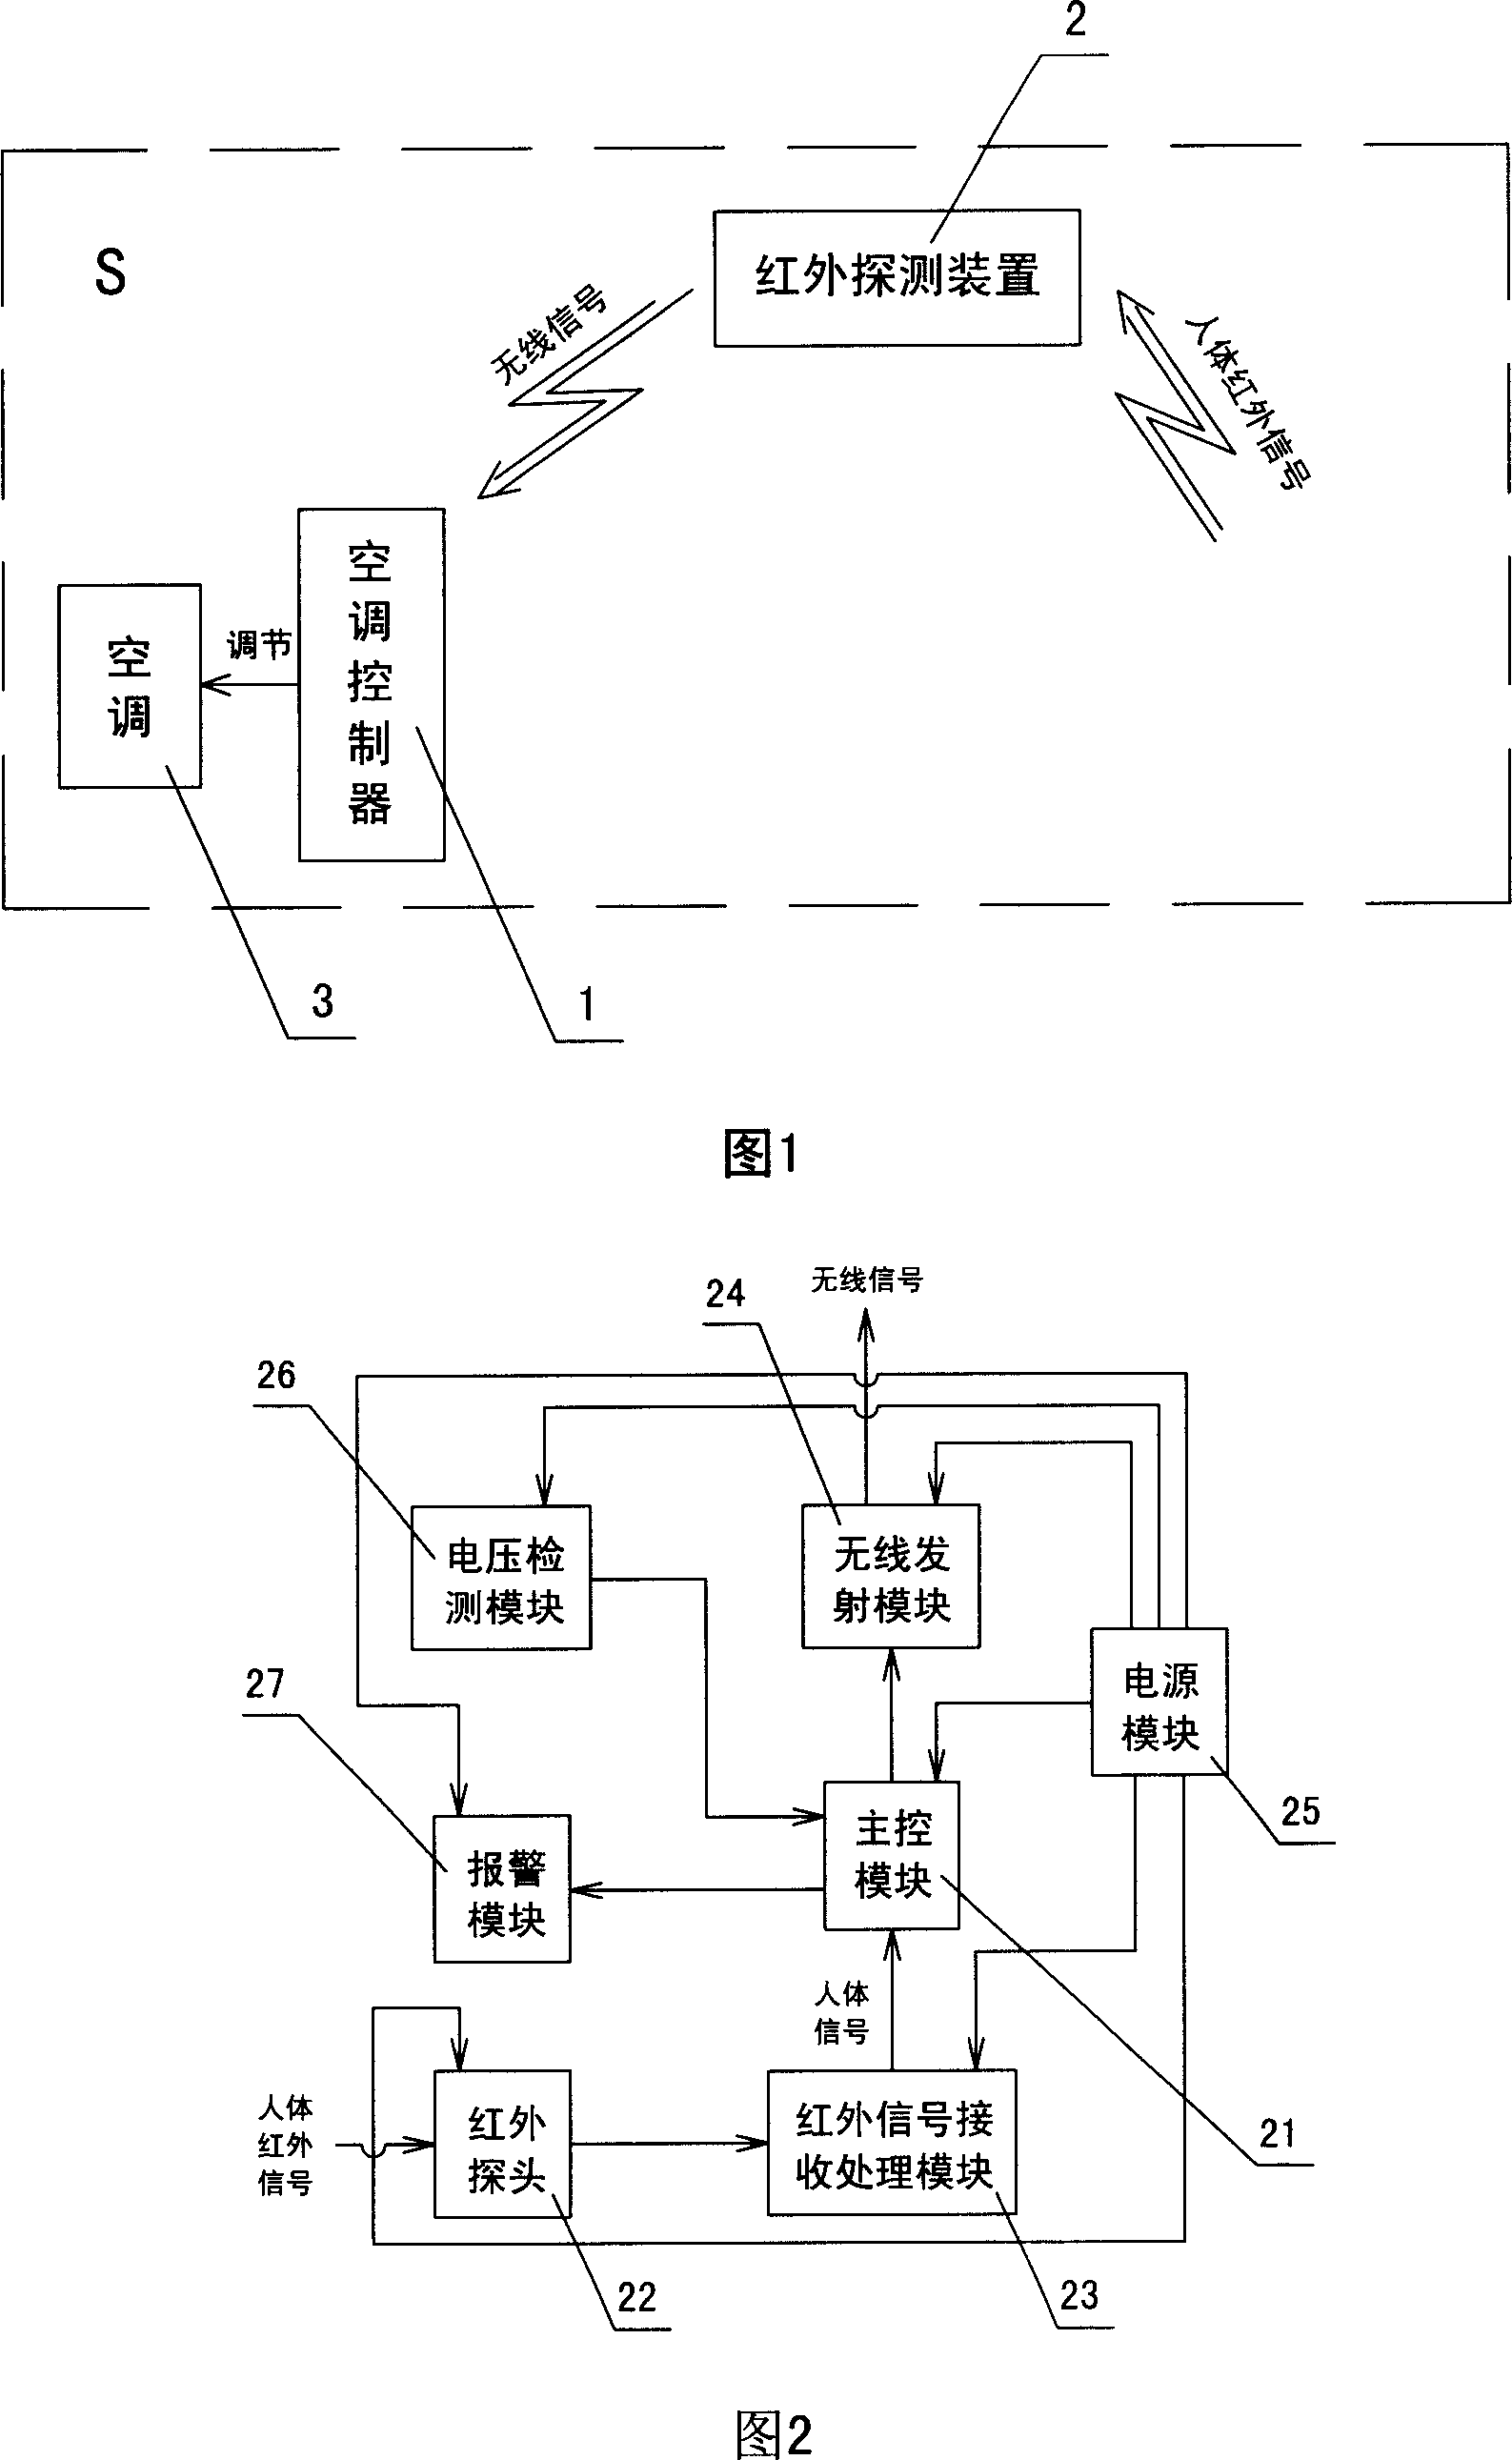 Intelligent air conditioner control method and system